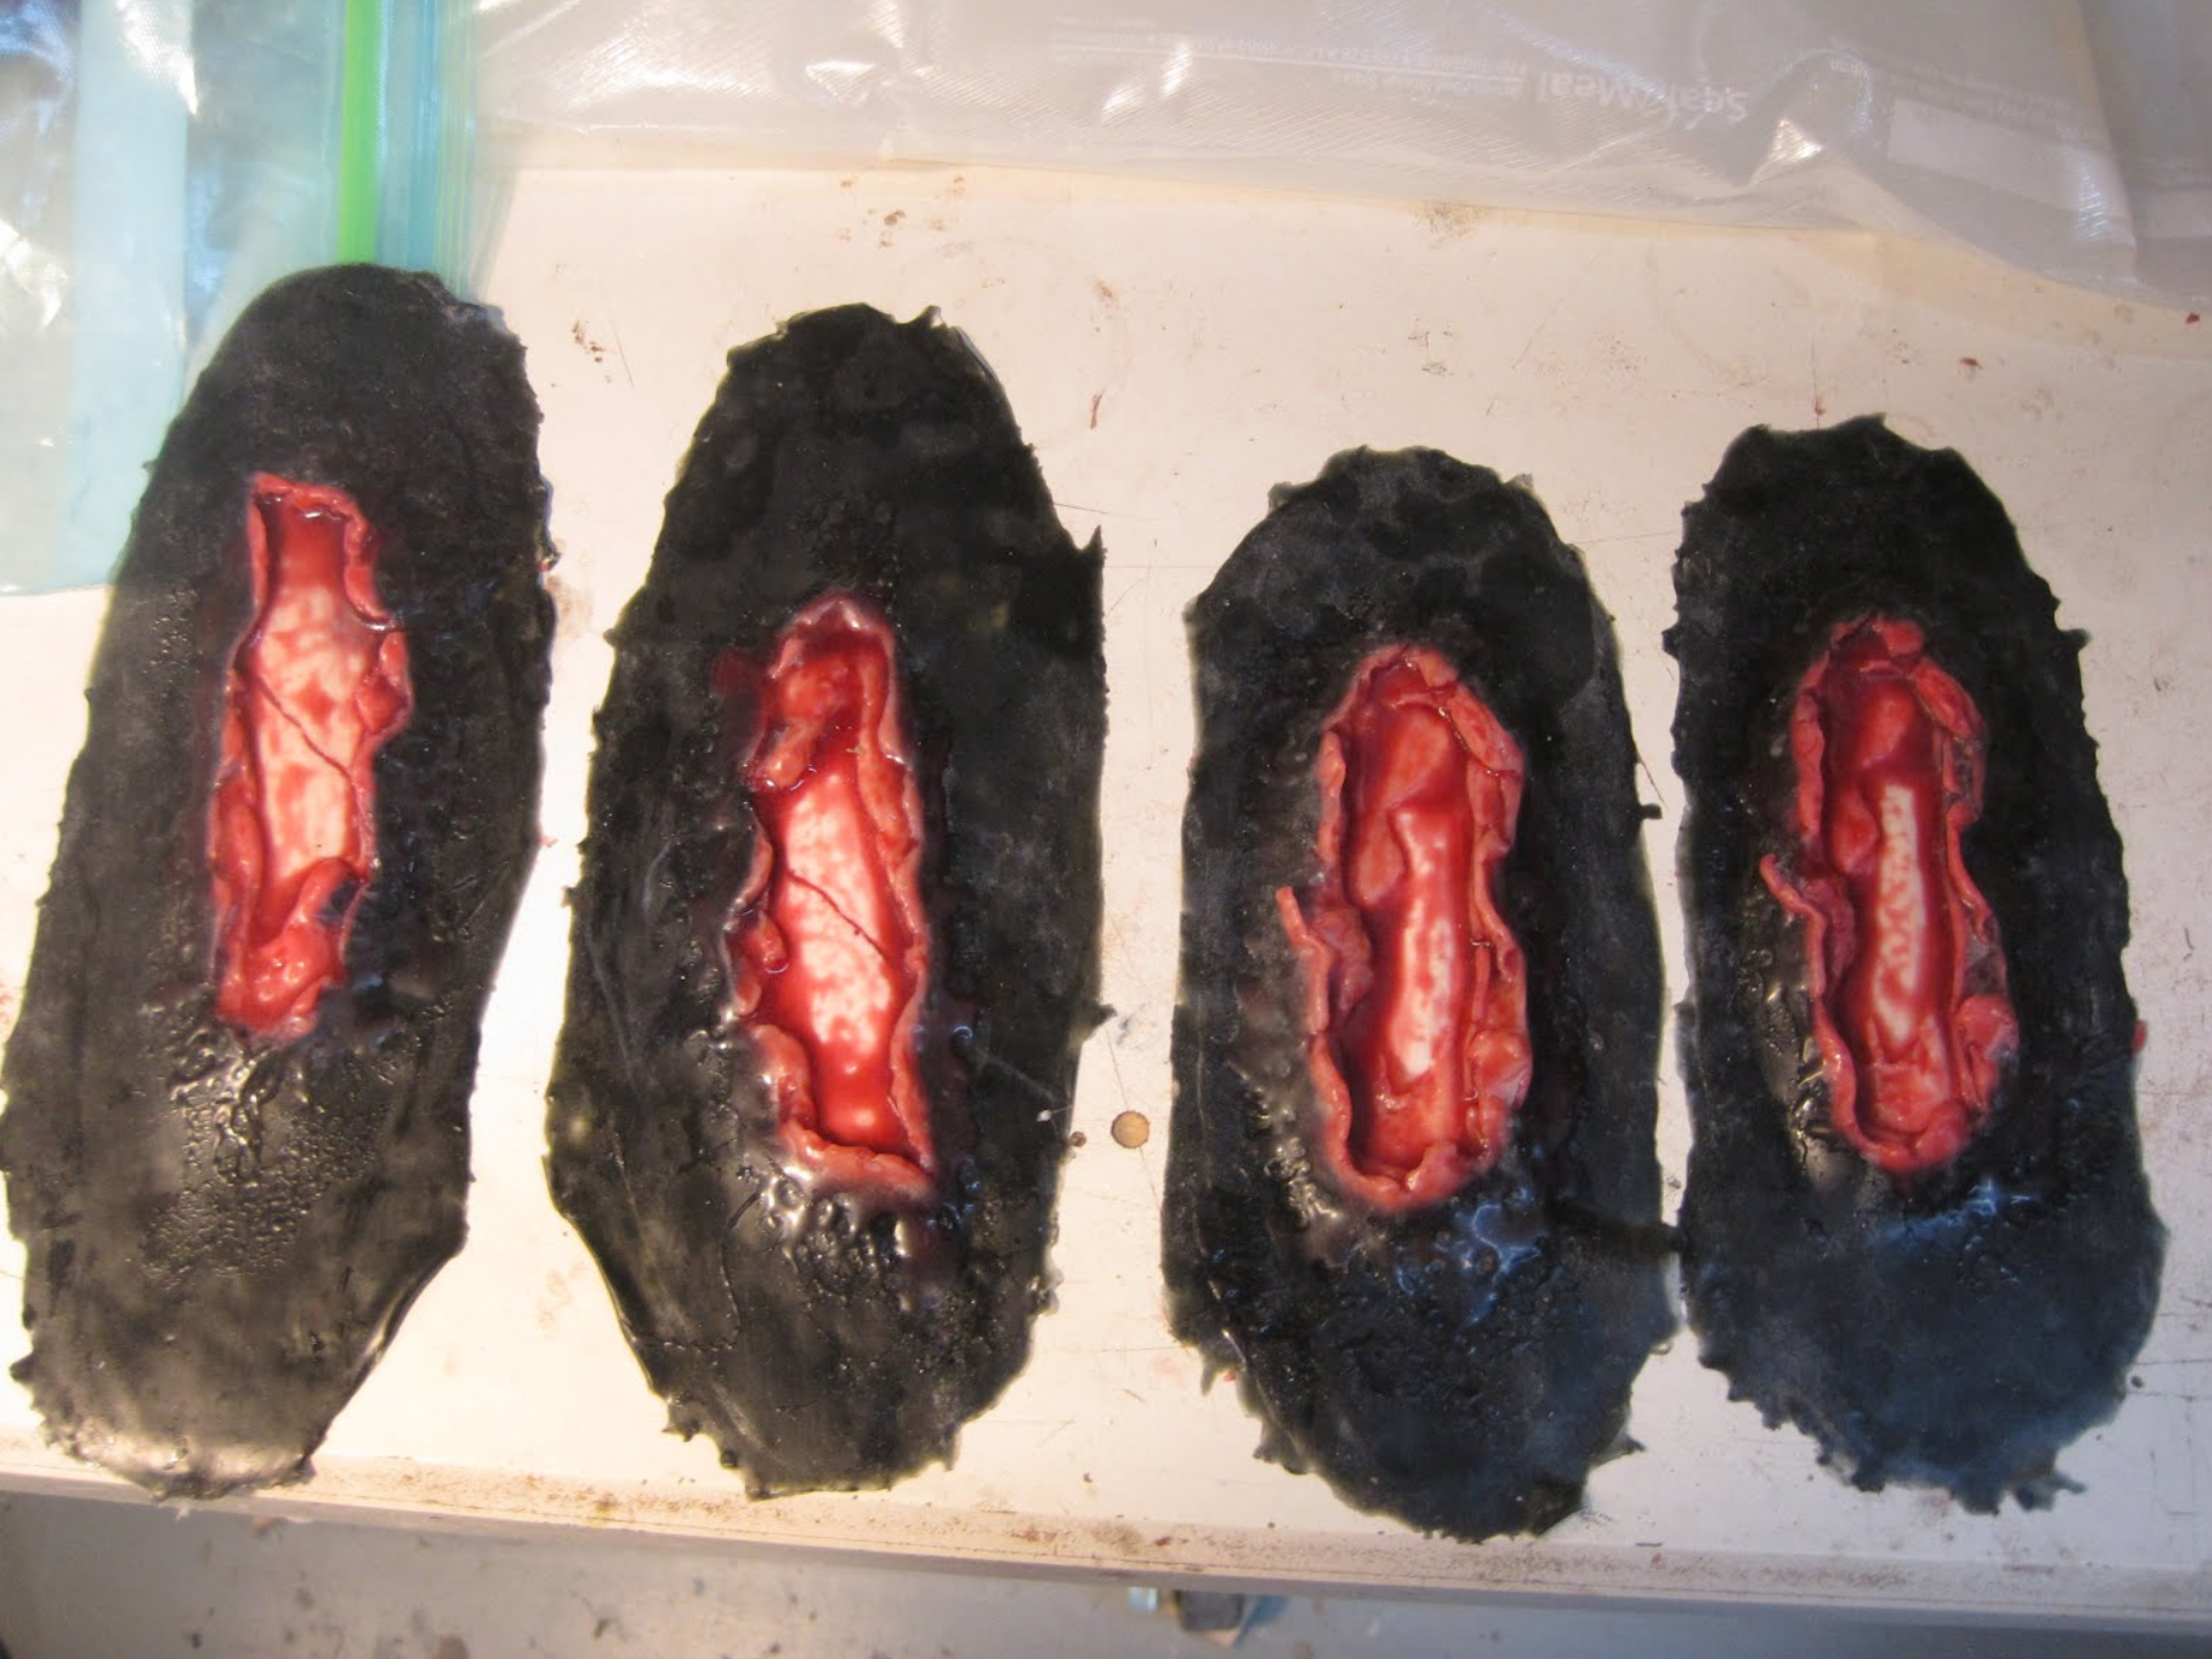  We have created simulated equine leg wounds for accident triage training. these wounds can be applied to the leg and re-used multiple times. UCVM does simulated horse trailer accidents for students and veterinarians. 